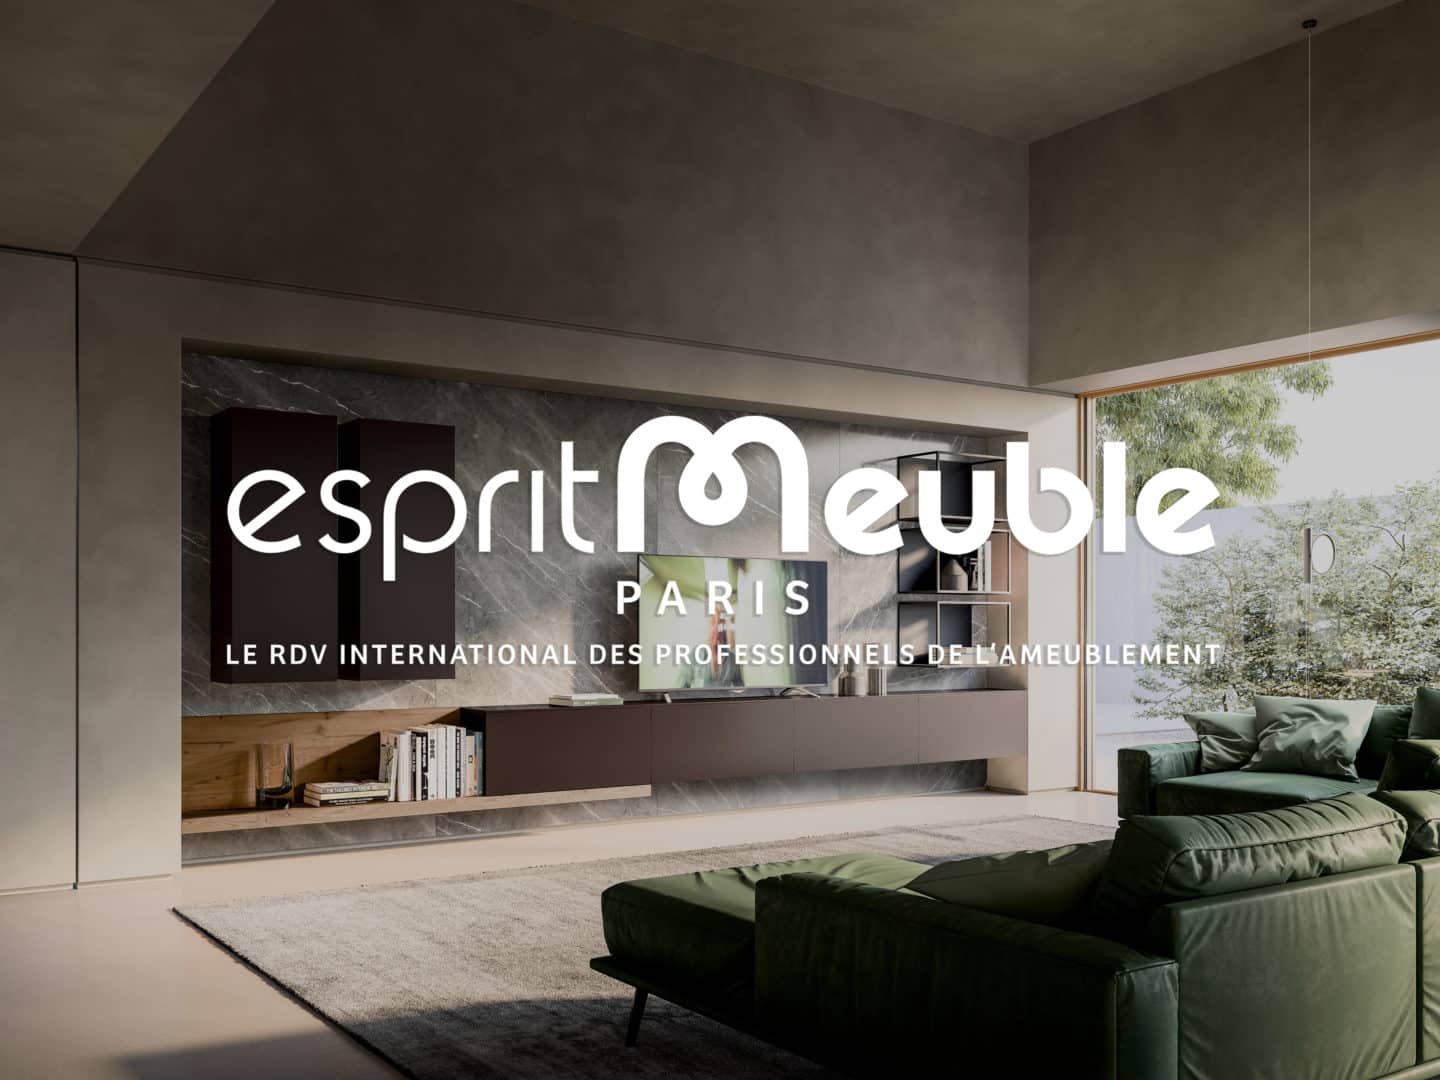 ARMONY Cucine will be attending Esprit Meuble, a new salon to be held in France for kitchen manufacturers.